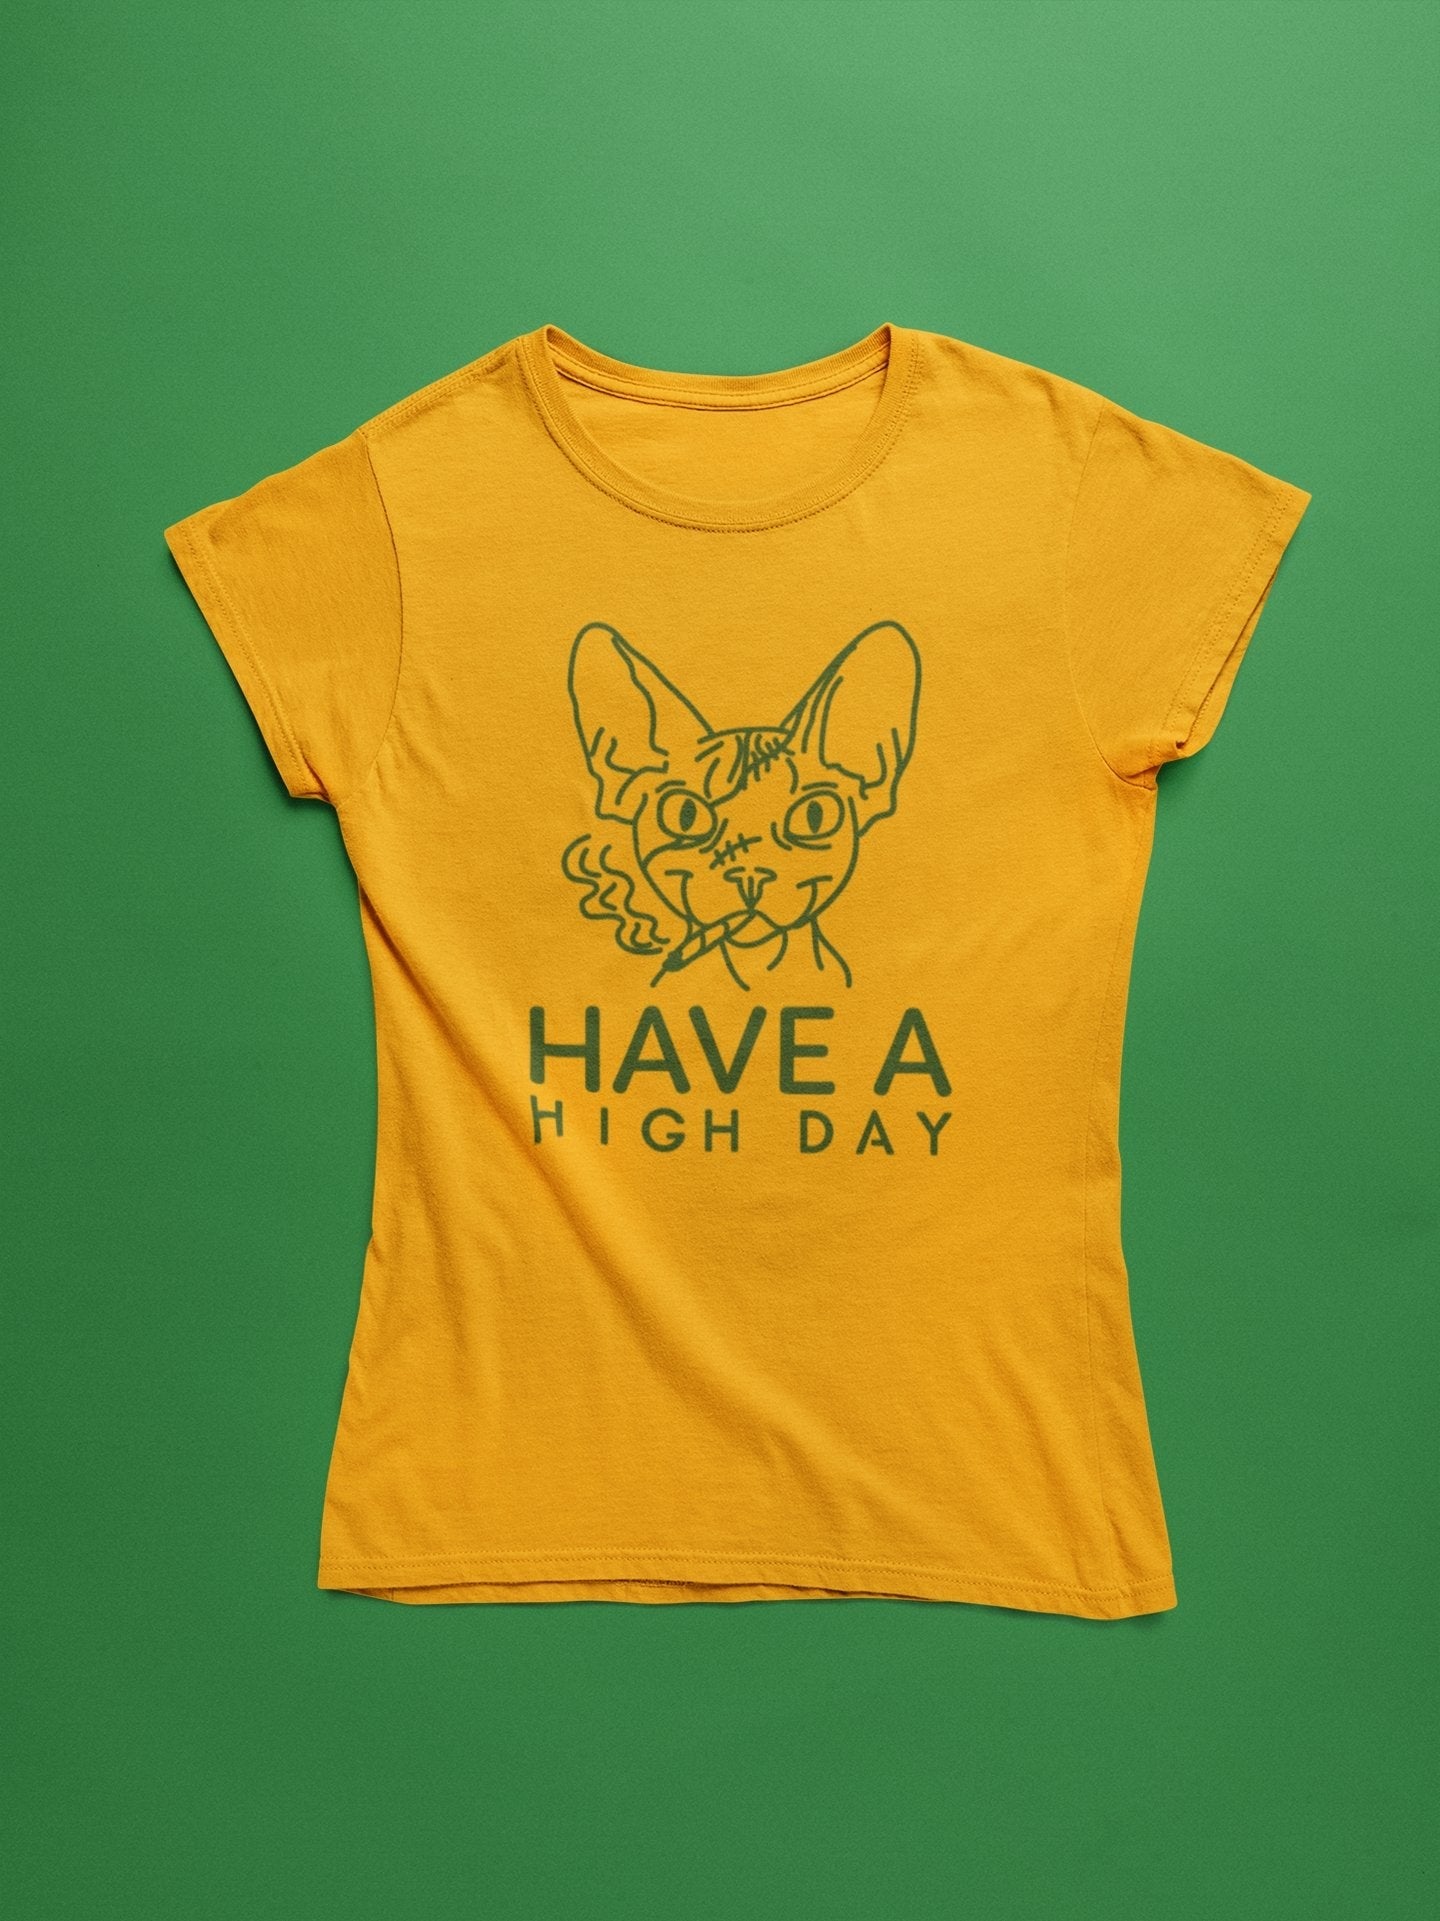 Have a High Day Stoner T Shirt - Insane Tees